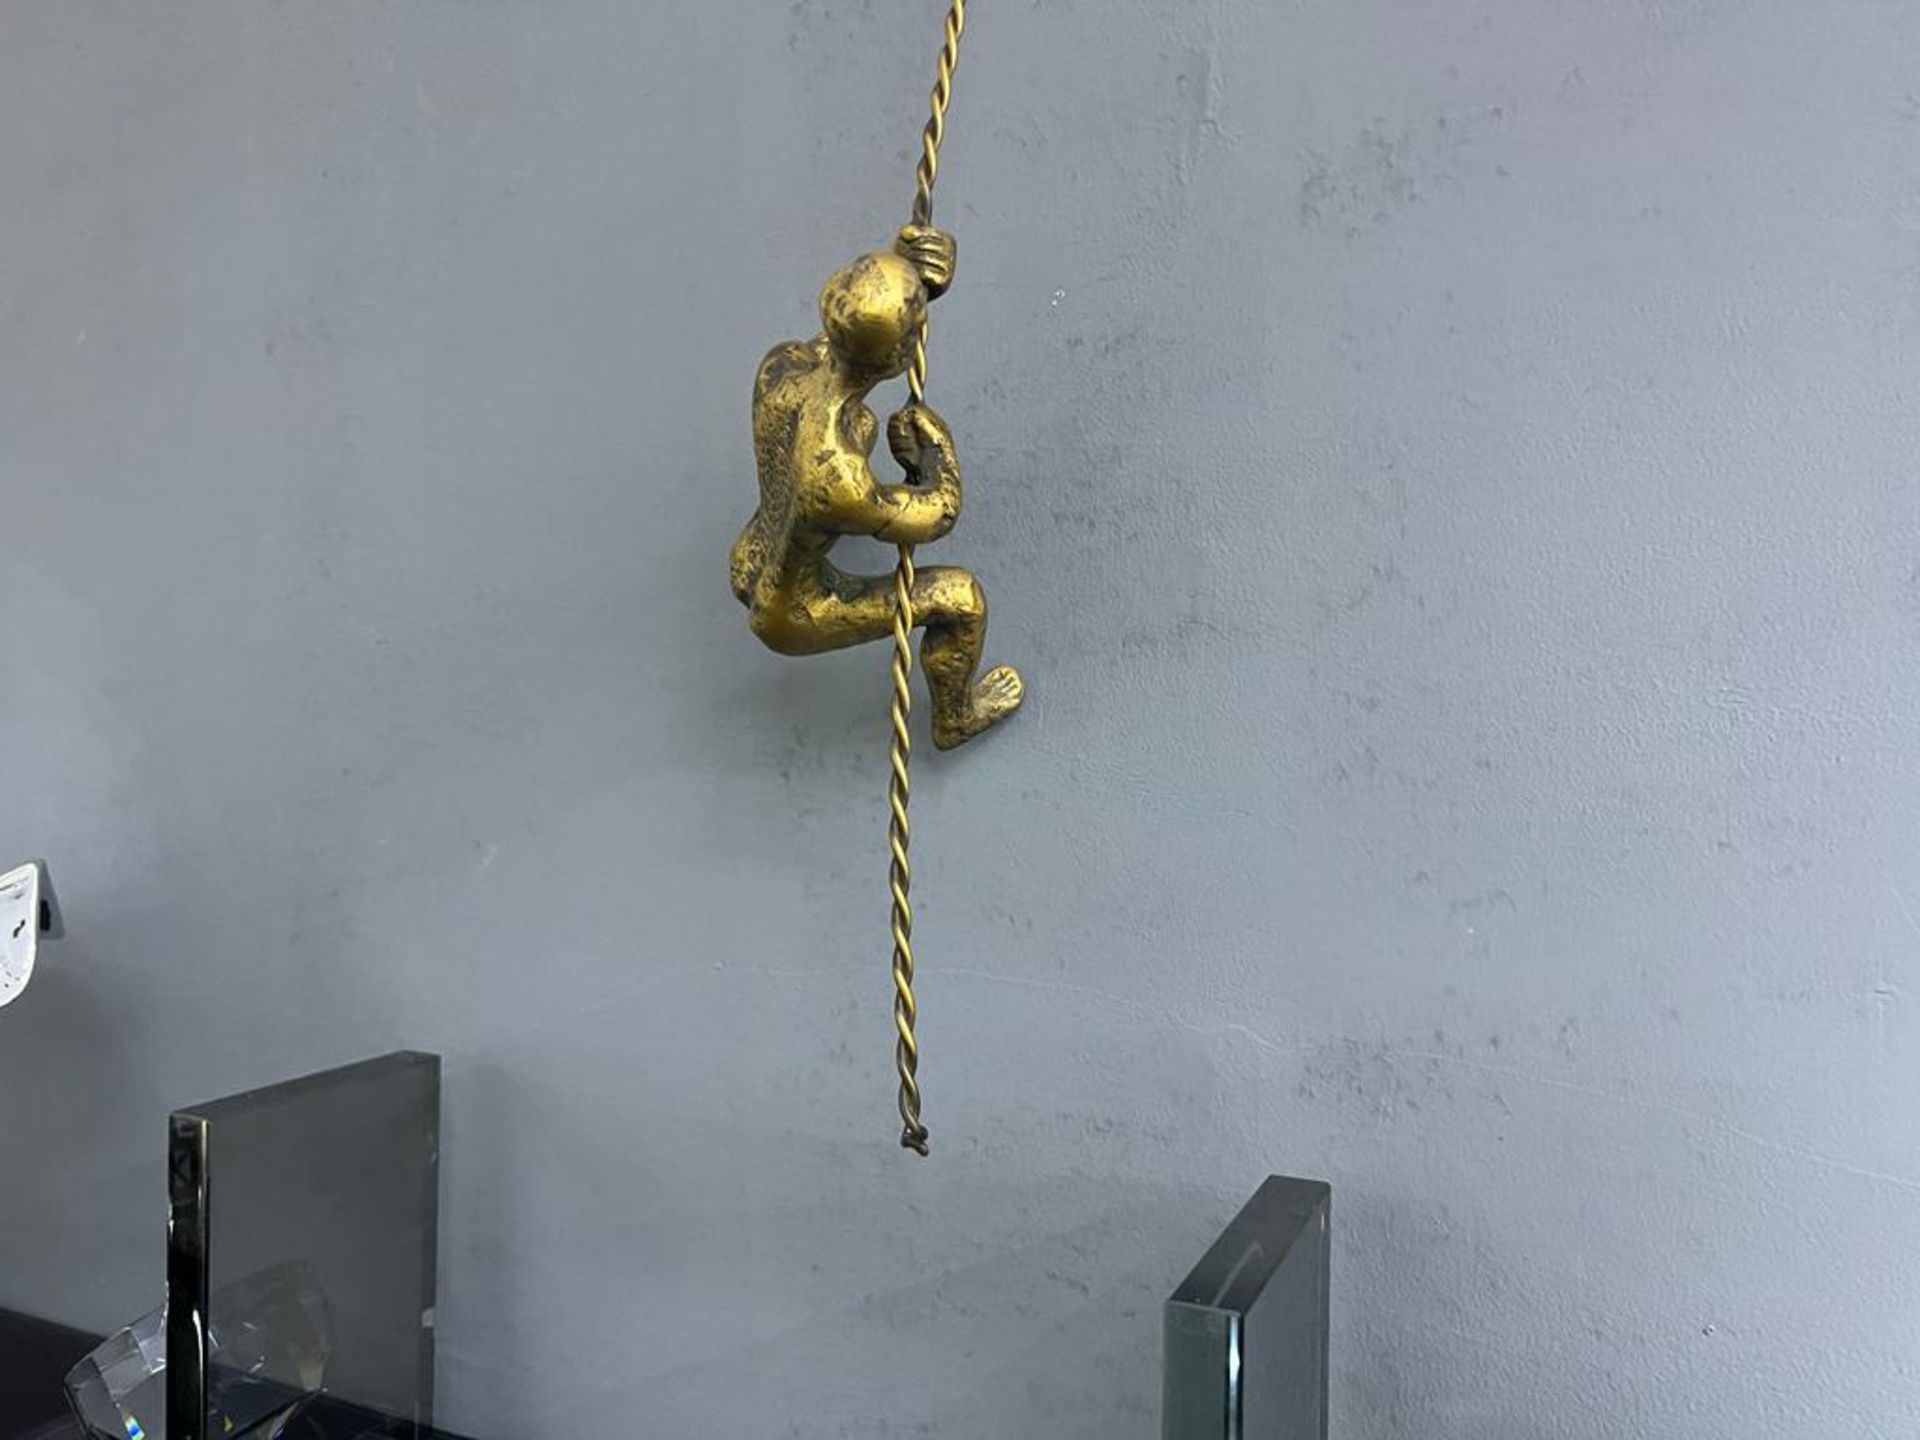 New Boxed Unique Modern Art Cast Iron Man Climbing On Rope Ornament - Gold - Image 2 of 3